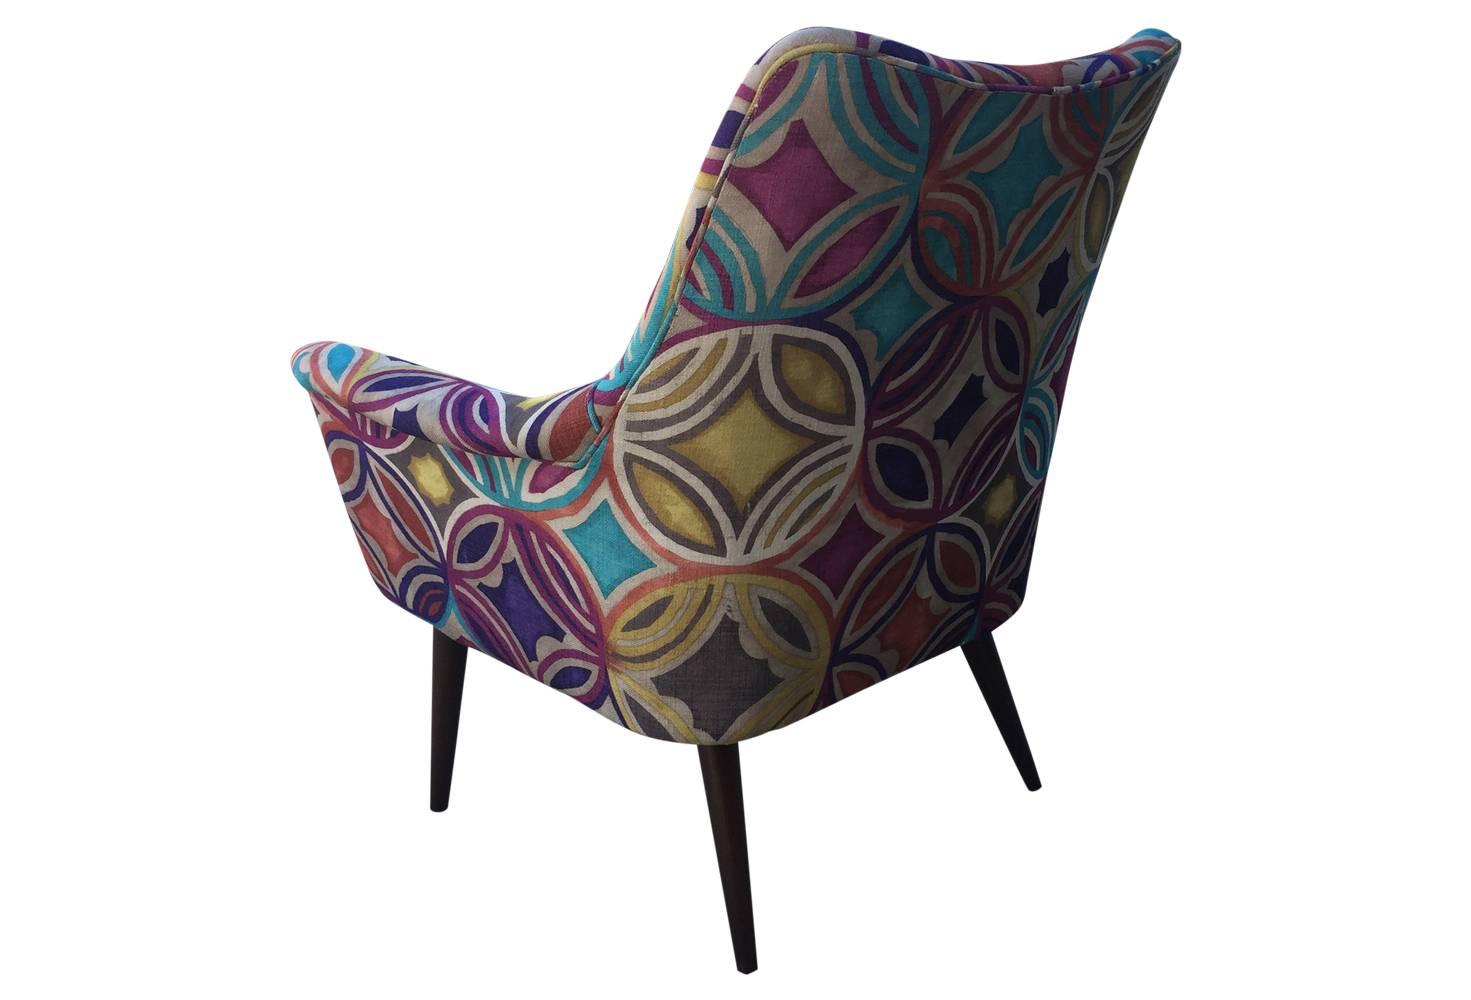 20th Century Colorful Mid-Century Modern Danish Chair in Abstract Expressionist Fabric